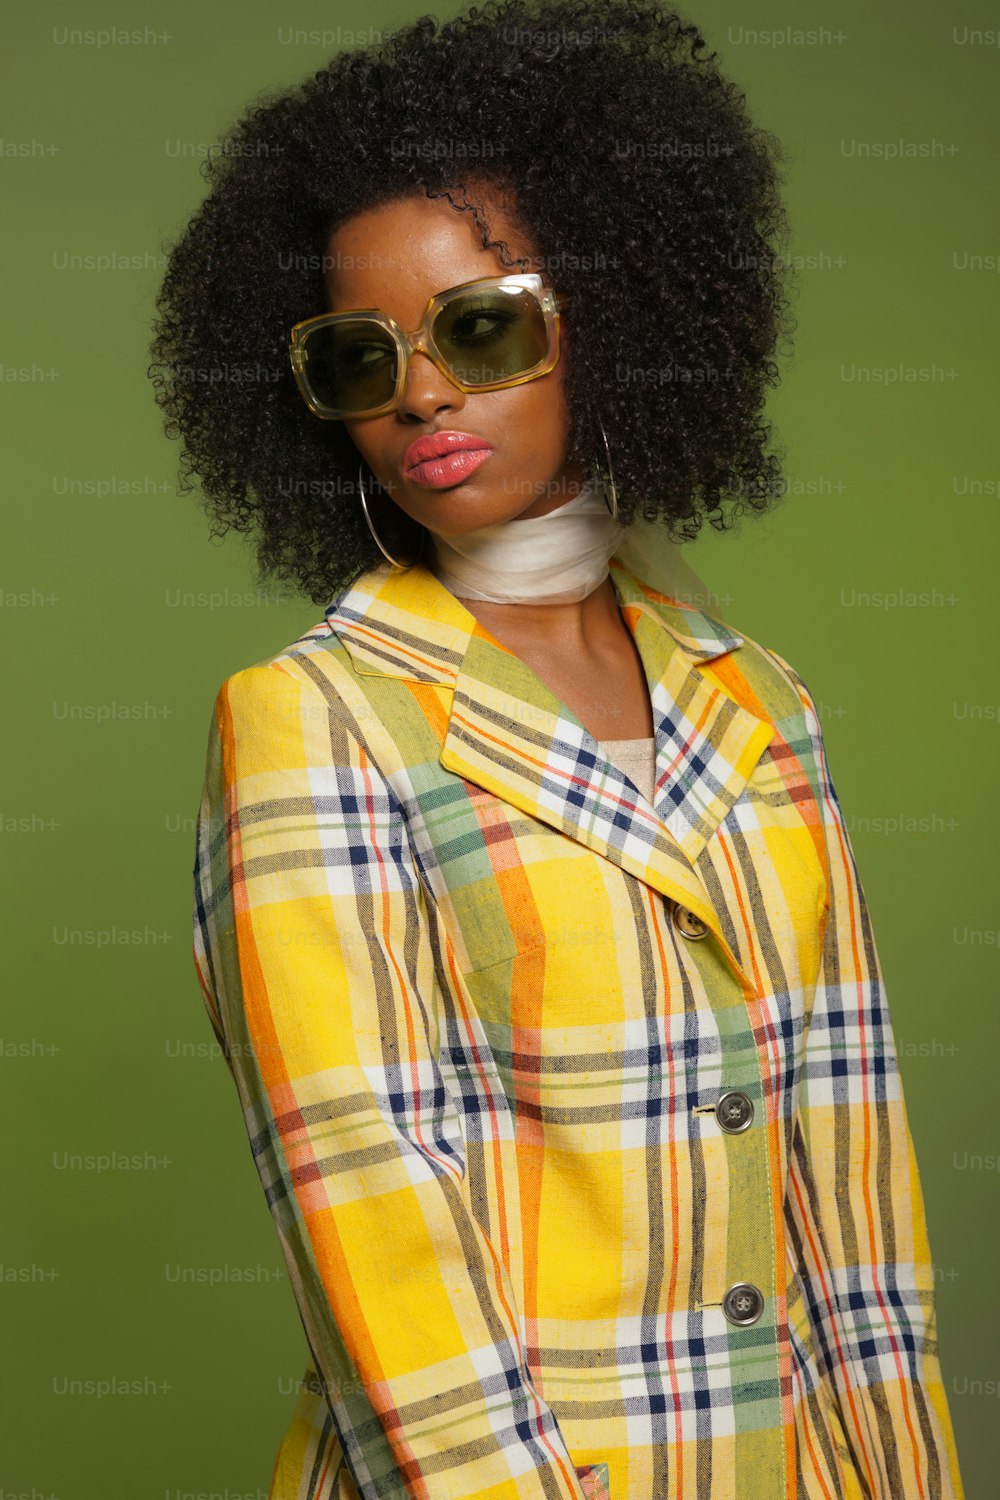 Retro 70s fashion style african woman with sunglasses. Yellow jacket and green background.